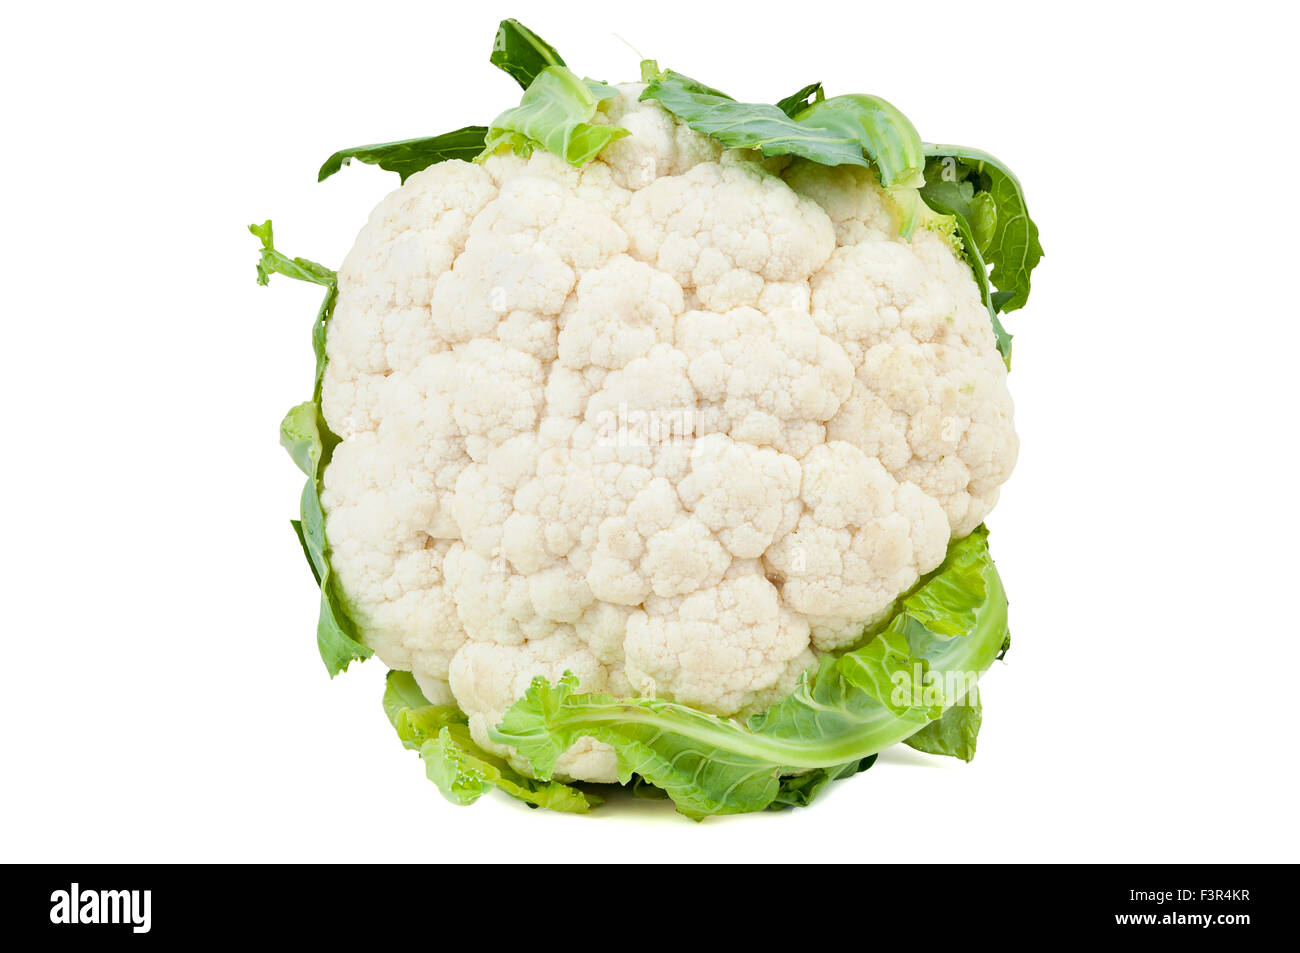 Cauliflower with leaves isolated on white background with clipping path Stock Photo